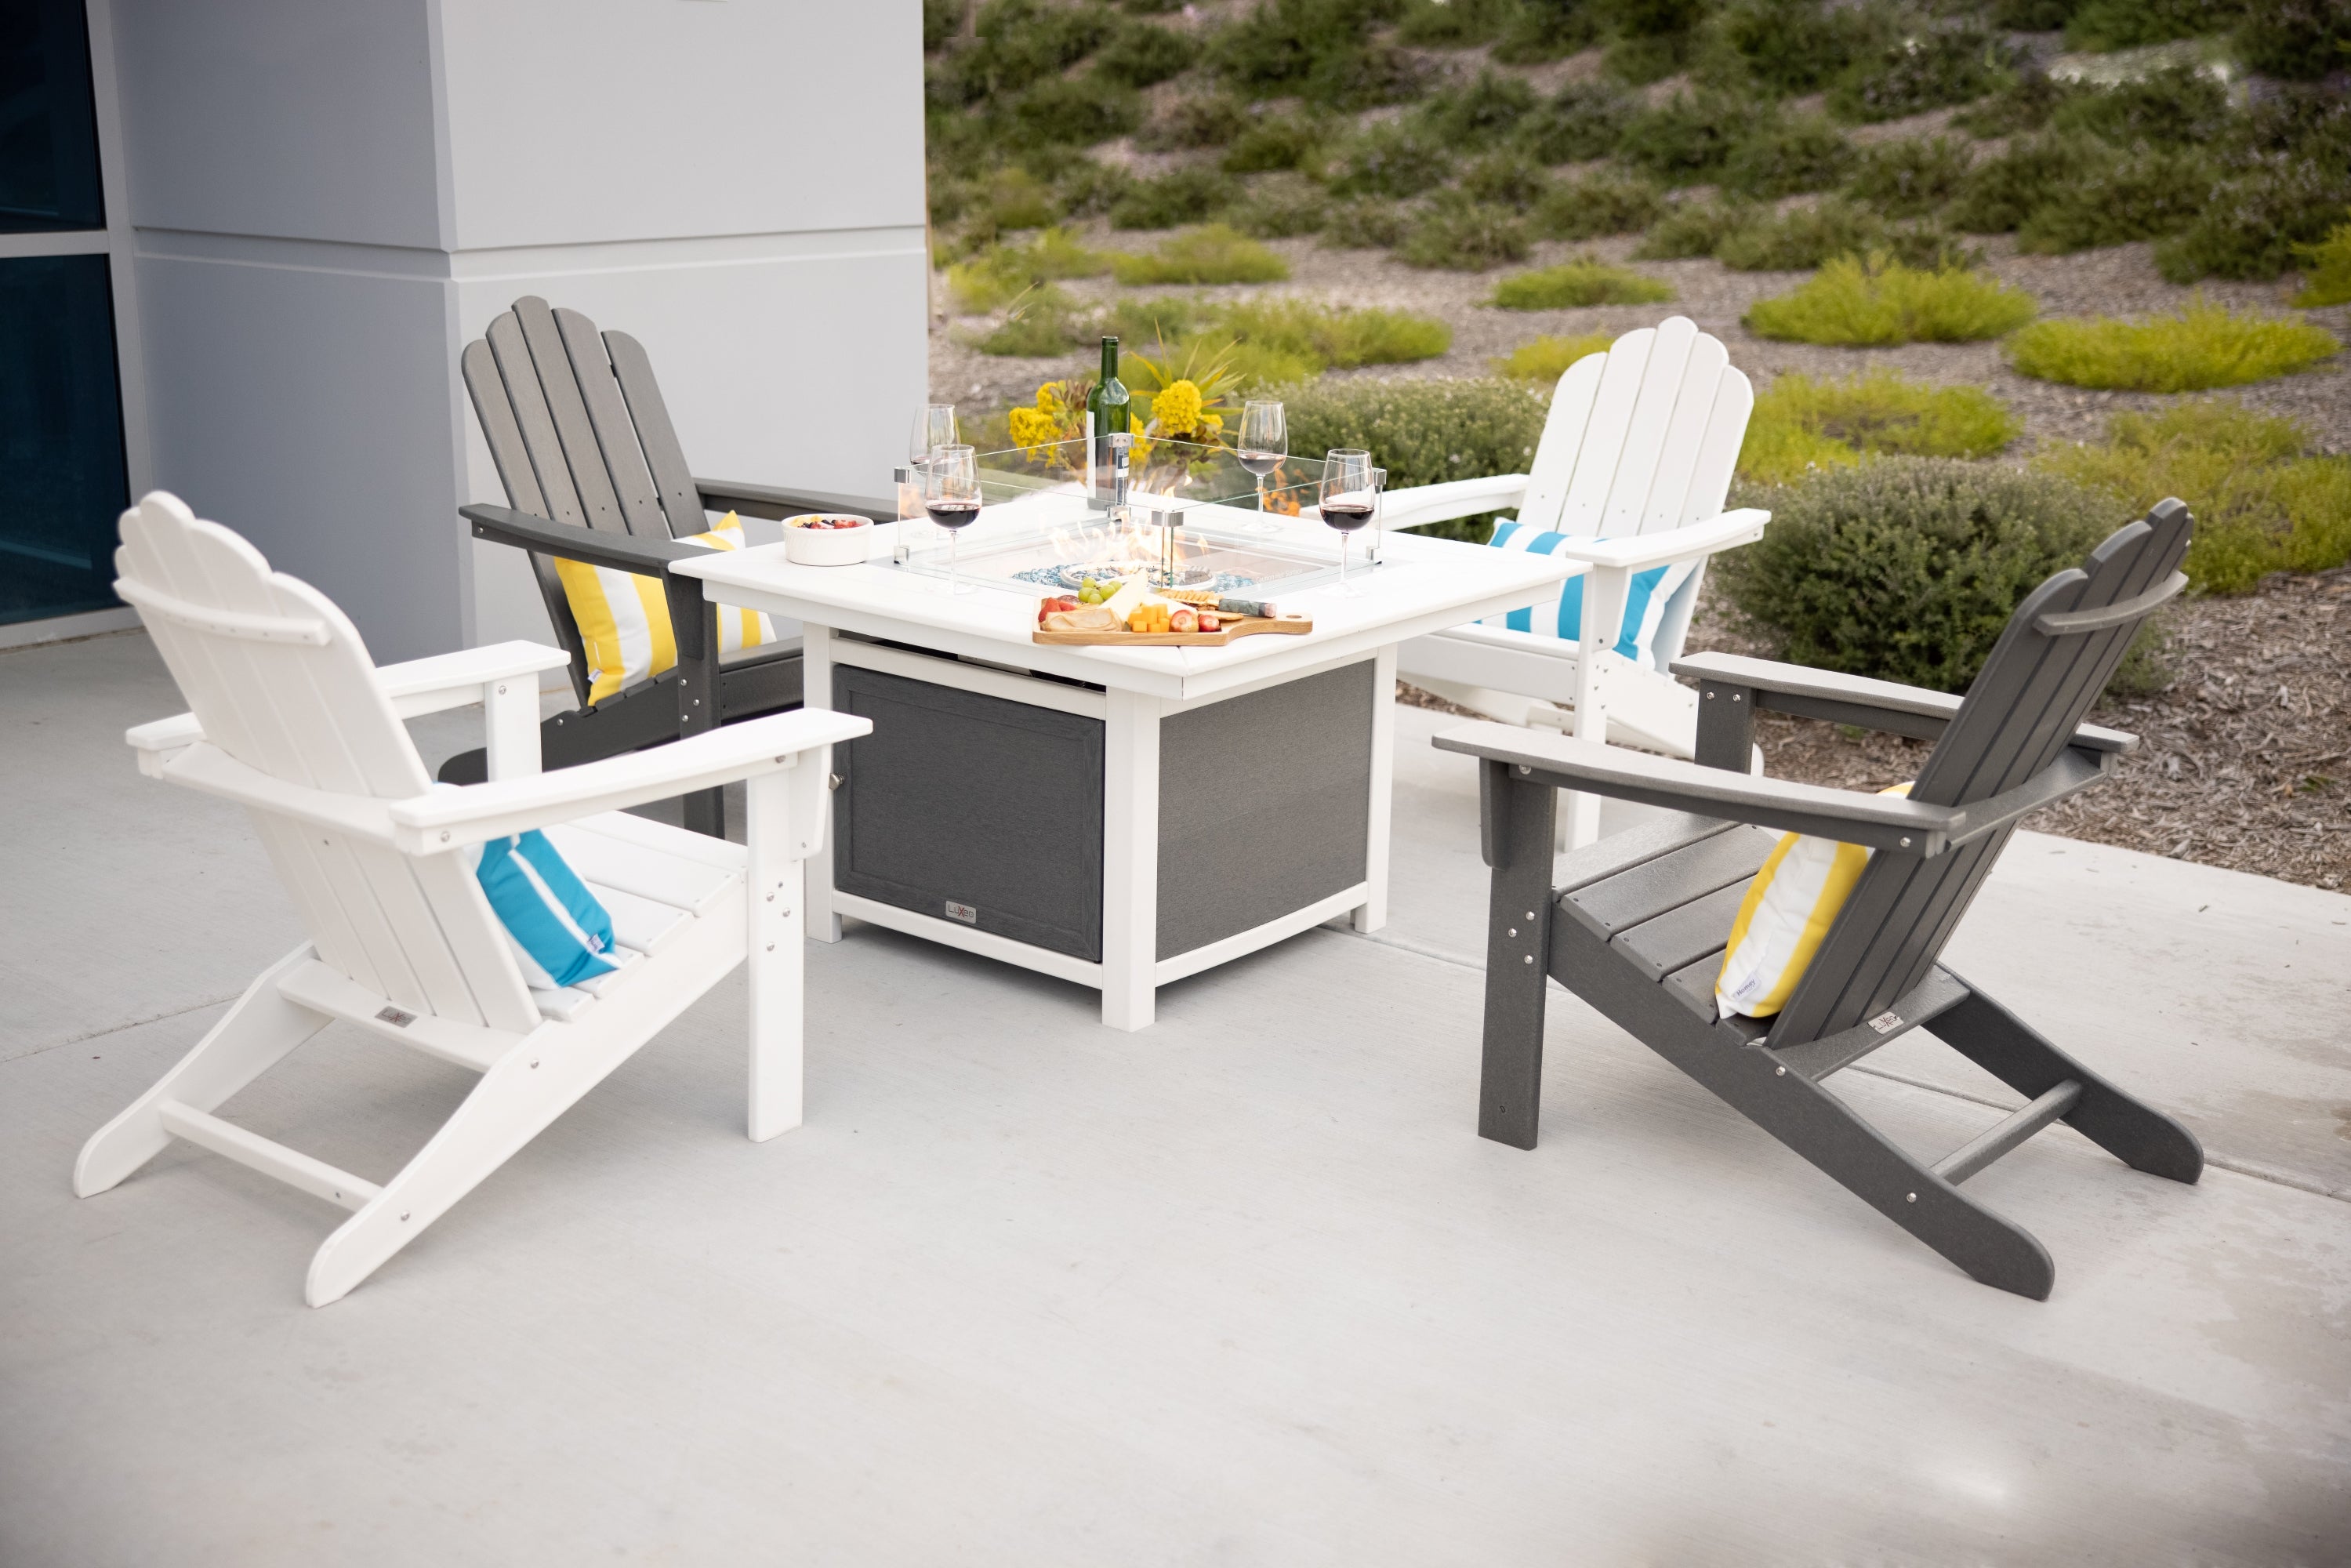 Park City 42" Two-Tone Fire Pit Table, Square Top with Four Marina Chairs